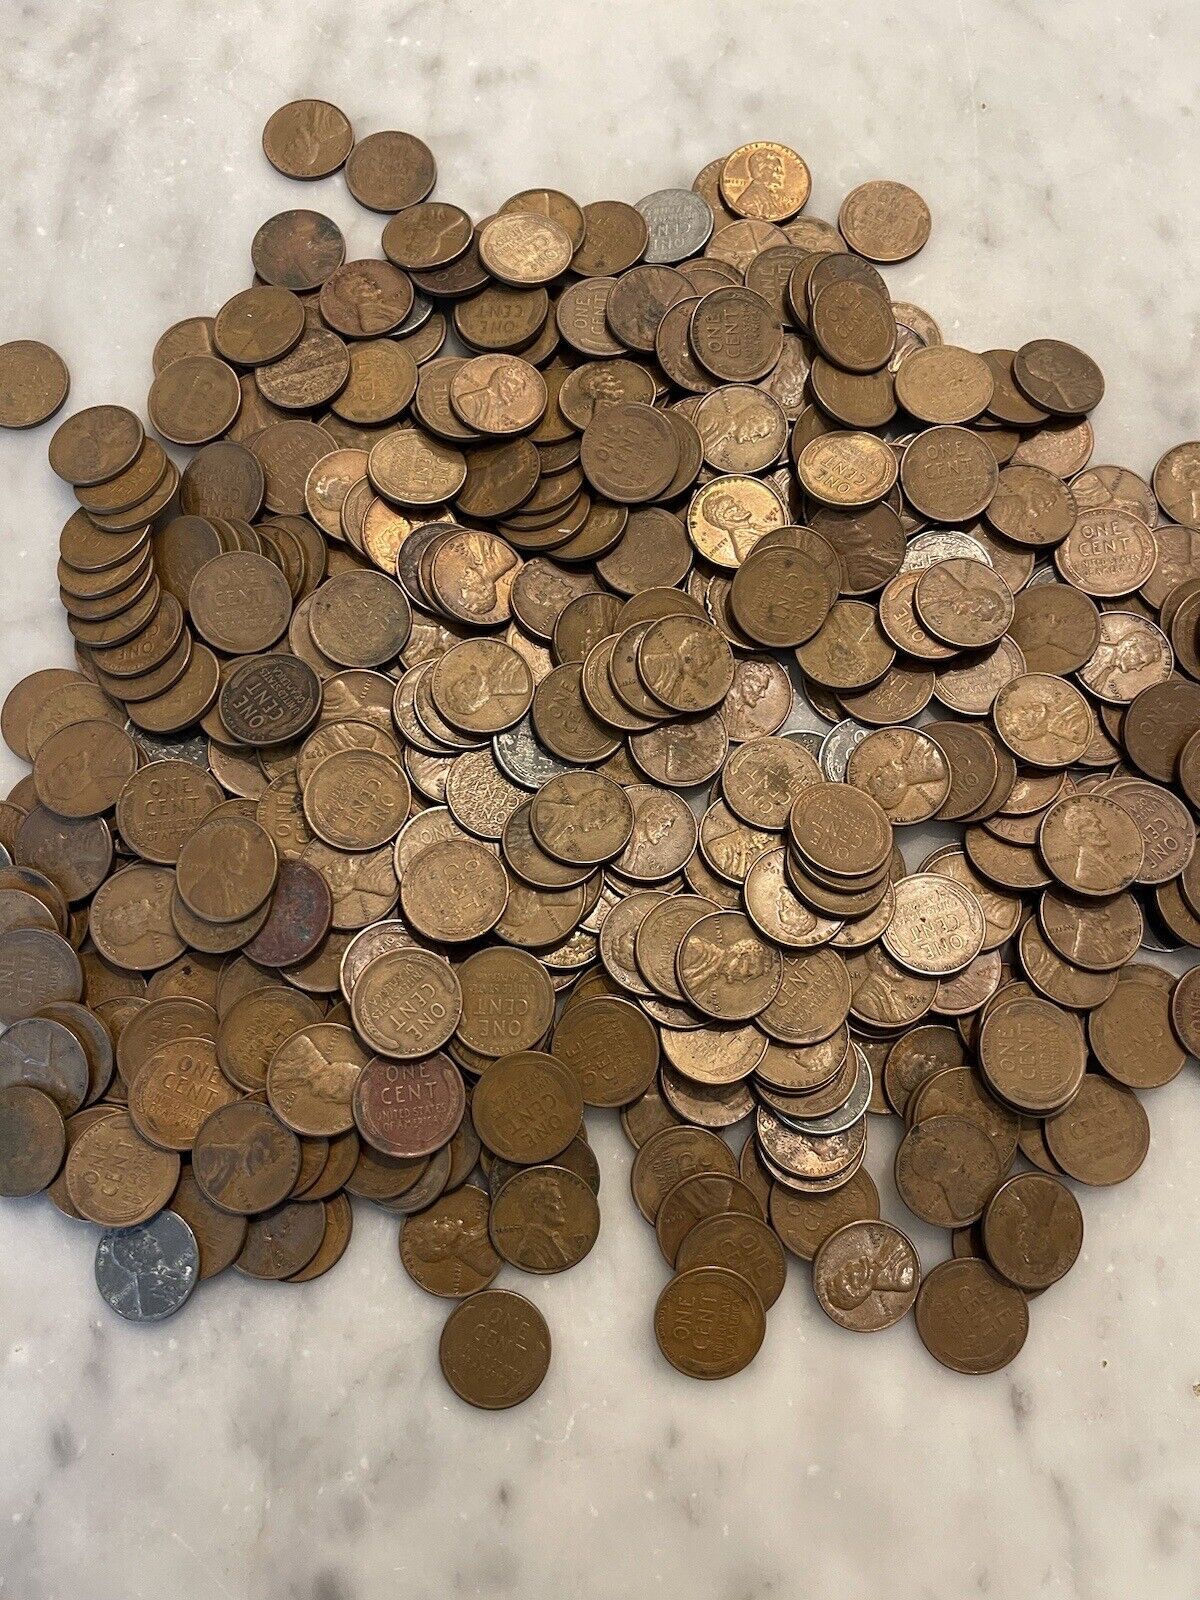 Lot of 500 Mixed Wheat Cents - 500 Count Bag or 10 Rolls - CHOOSE # OF LOTS